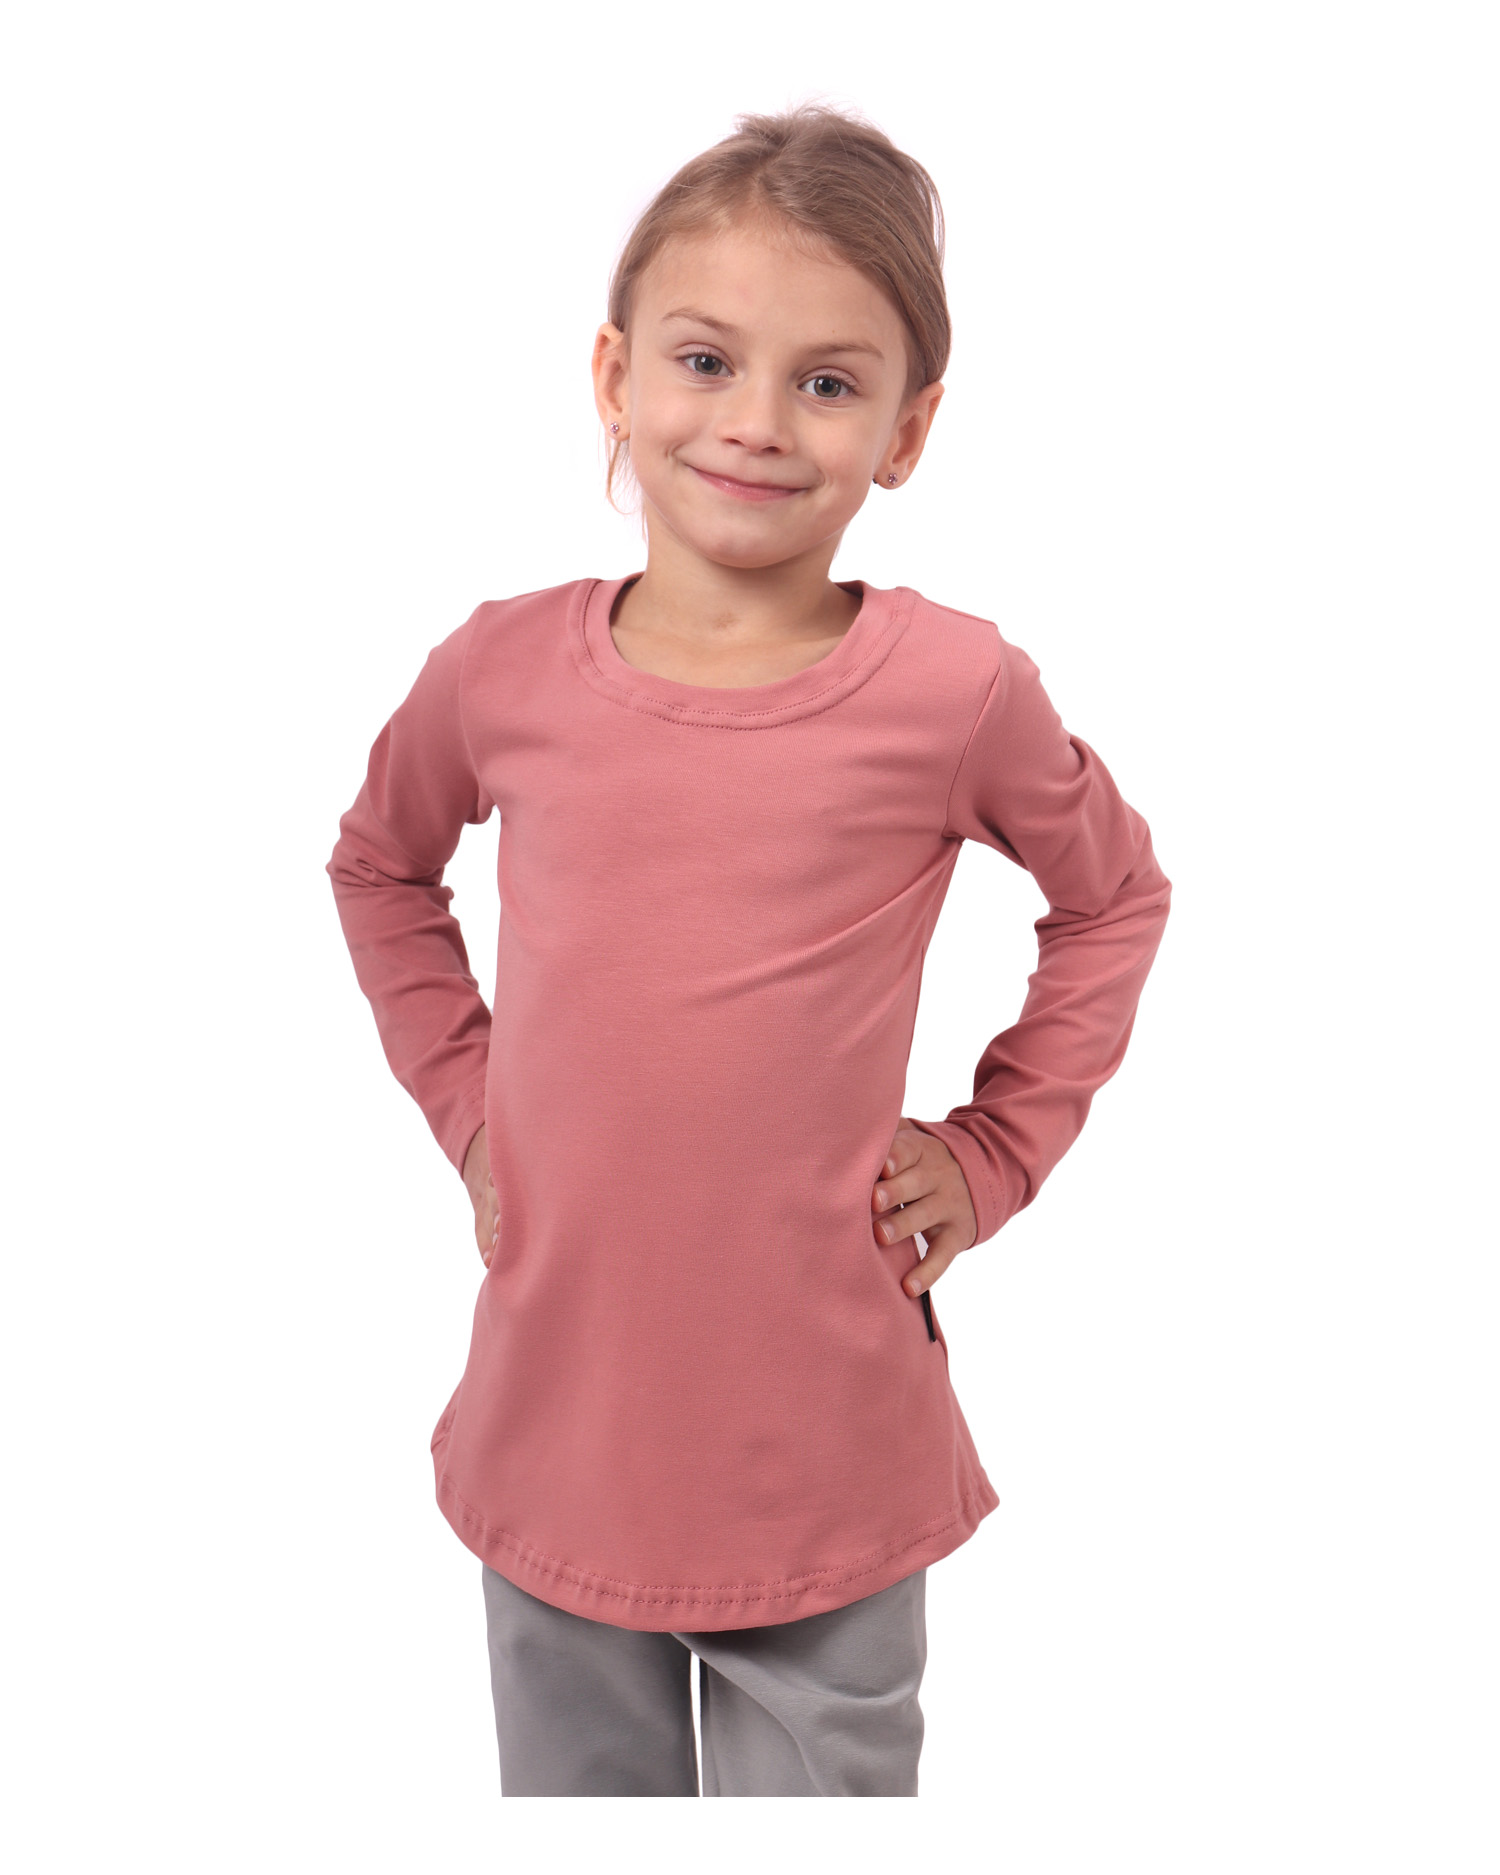 Girl's T-shirt, long sleeve, old pink